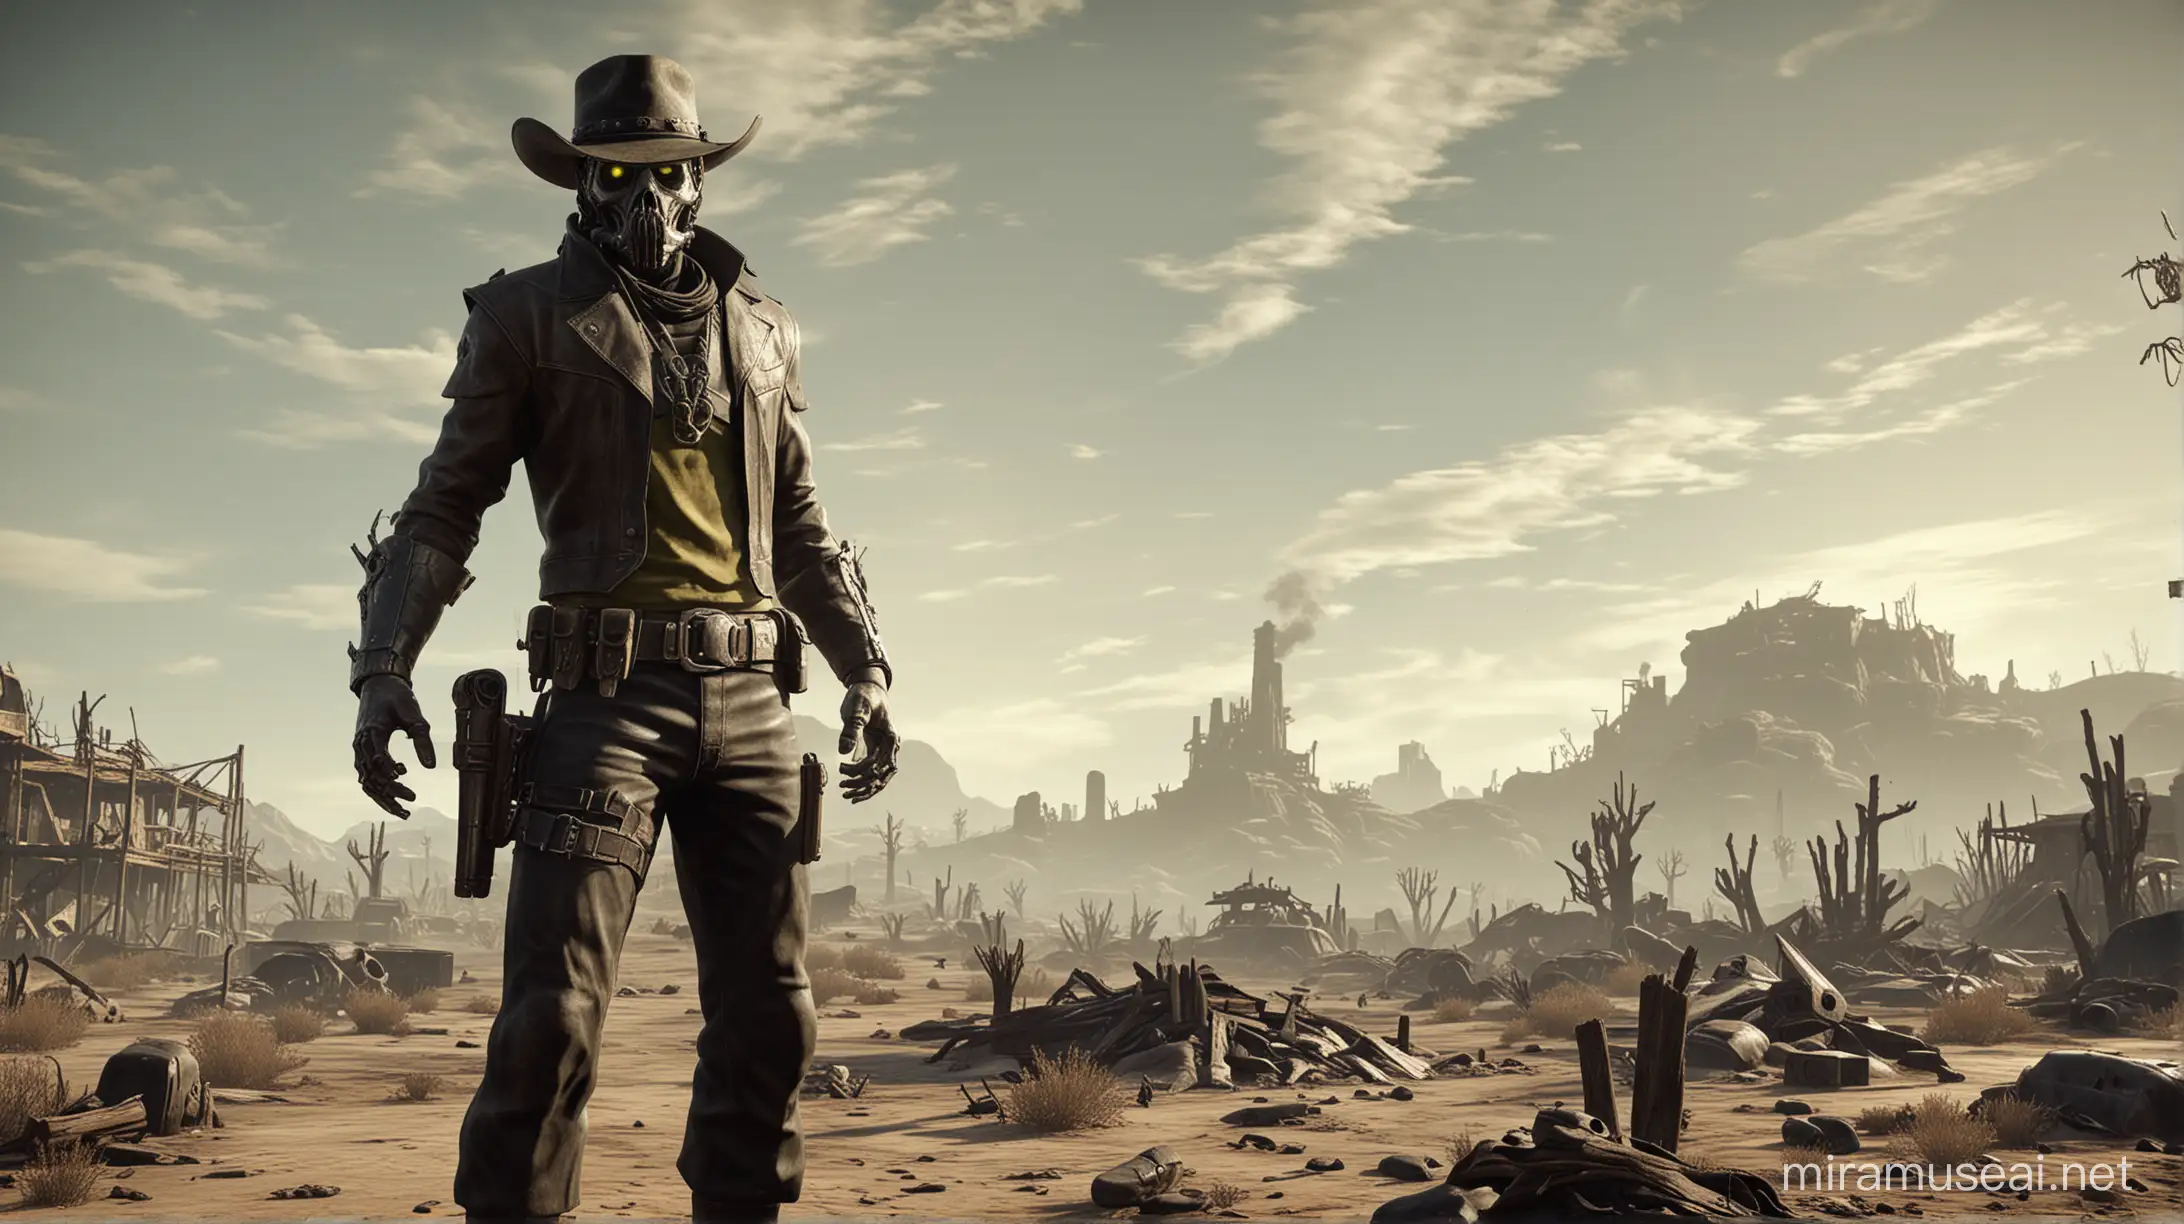 Fallout 4 Ghoul Surrendering in Wasteland with Cowboy Hat